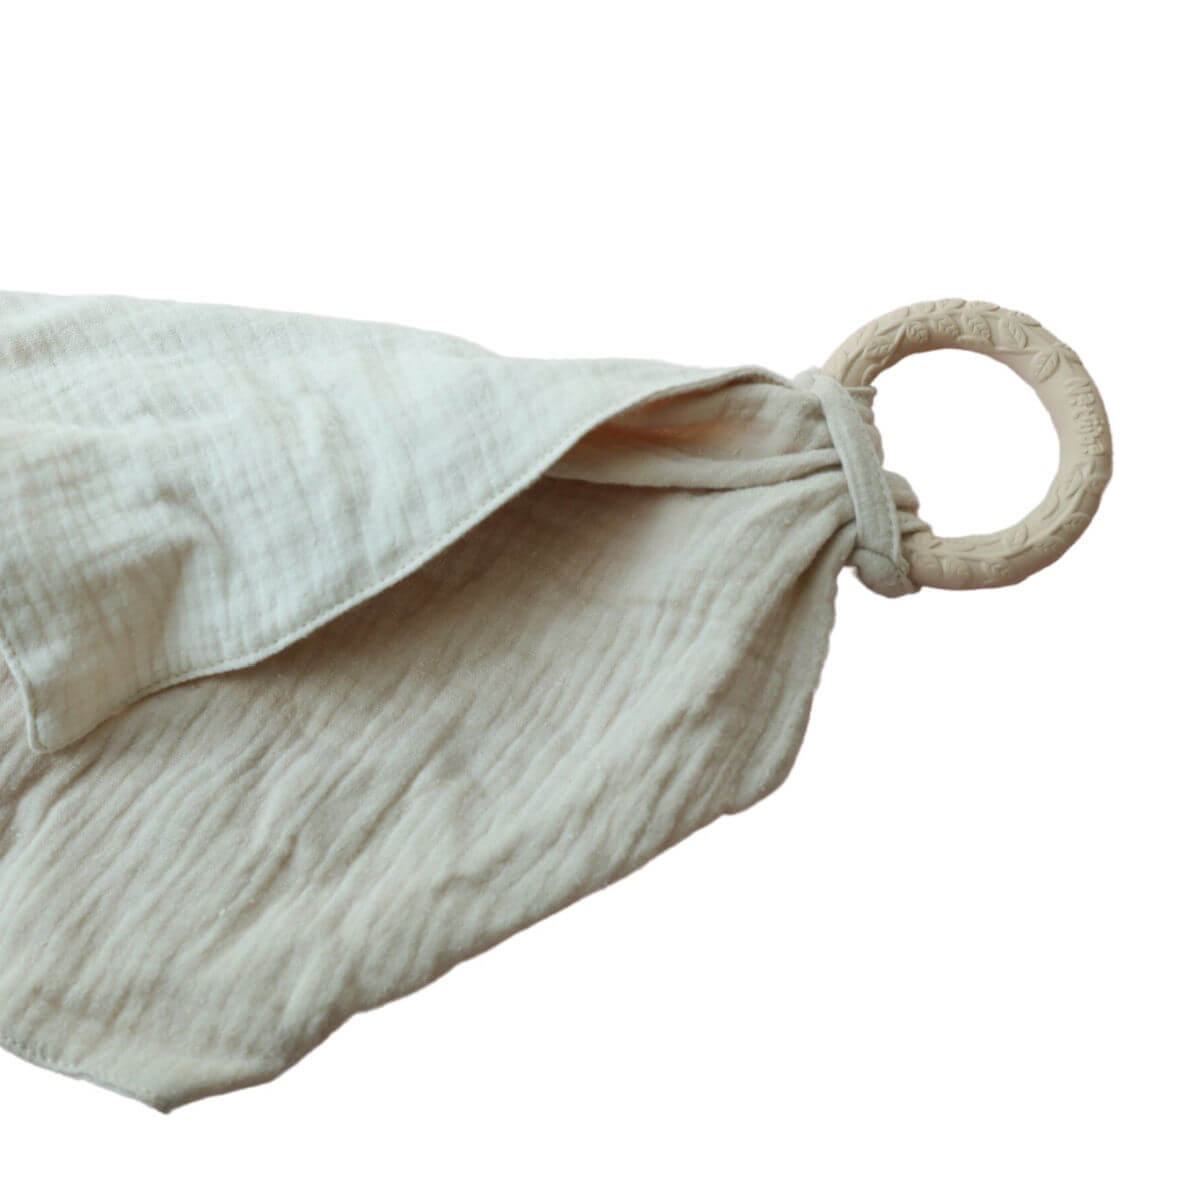 natruba organic cotton comforter and natural rubber teething ring in creme